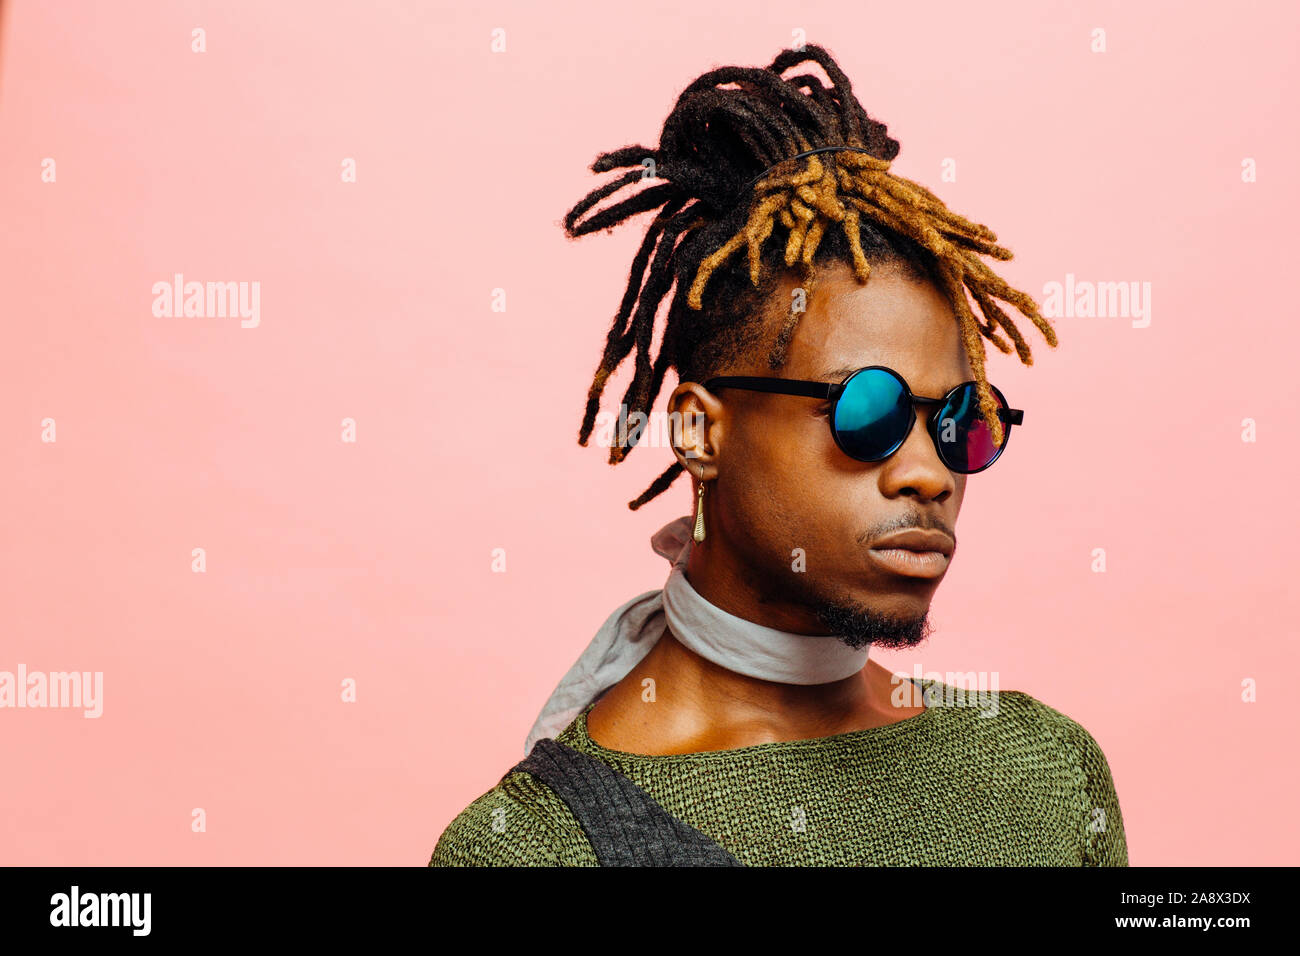 Close up portrait of a young man in green with dreadlocks and blue sunglasses, isolated on pink Stock Photo